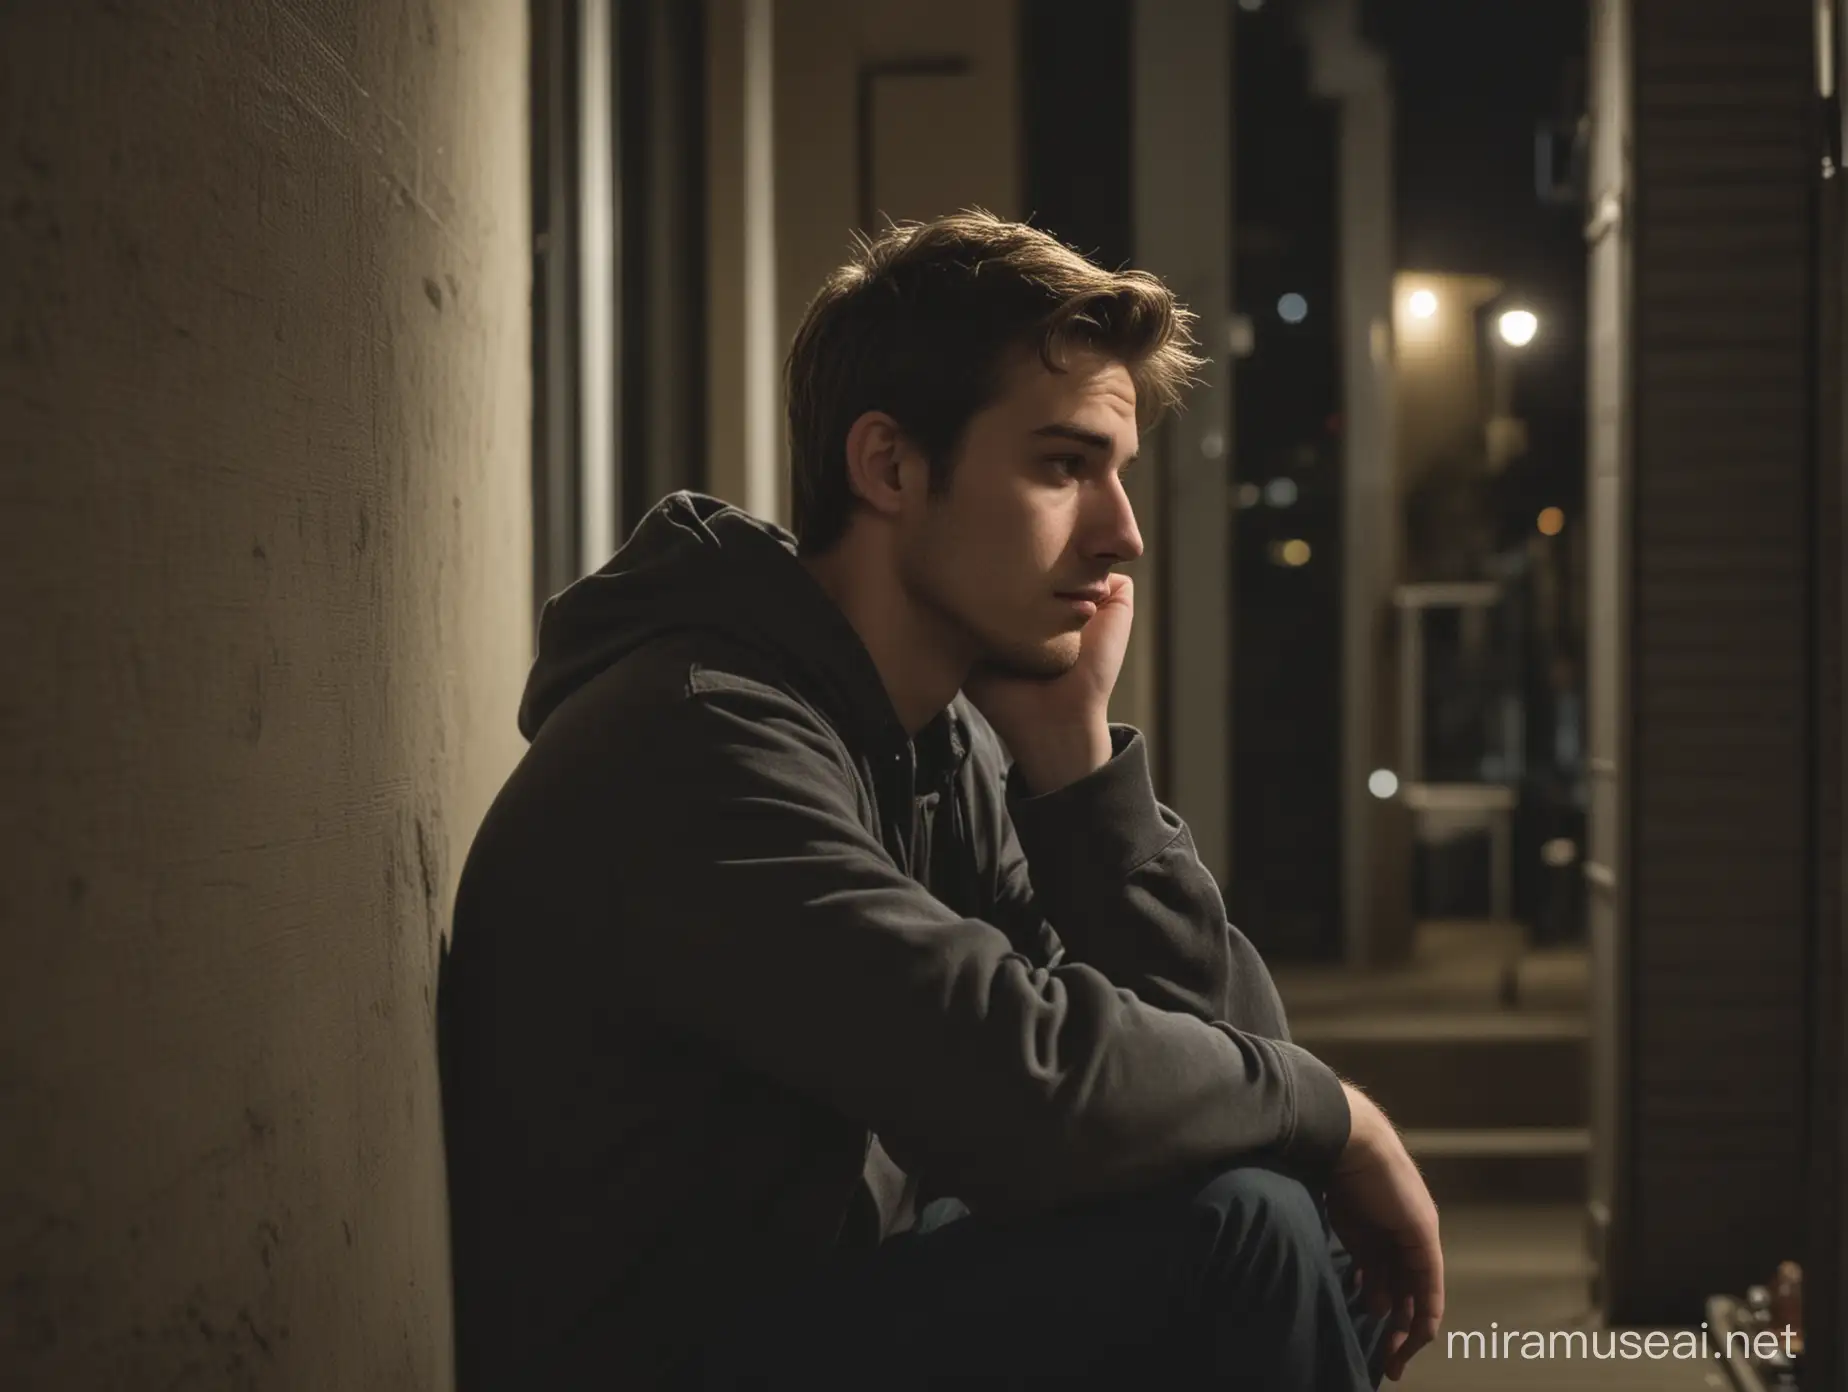 Young Adult Contemplating Alone at Night Outside His Apartment